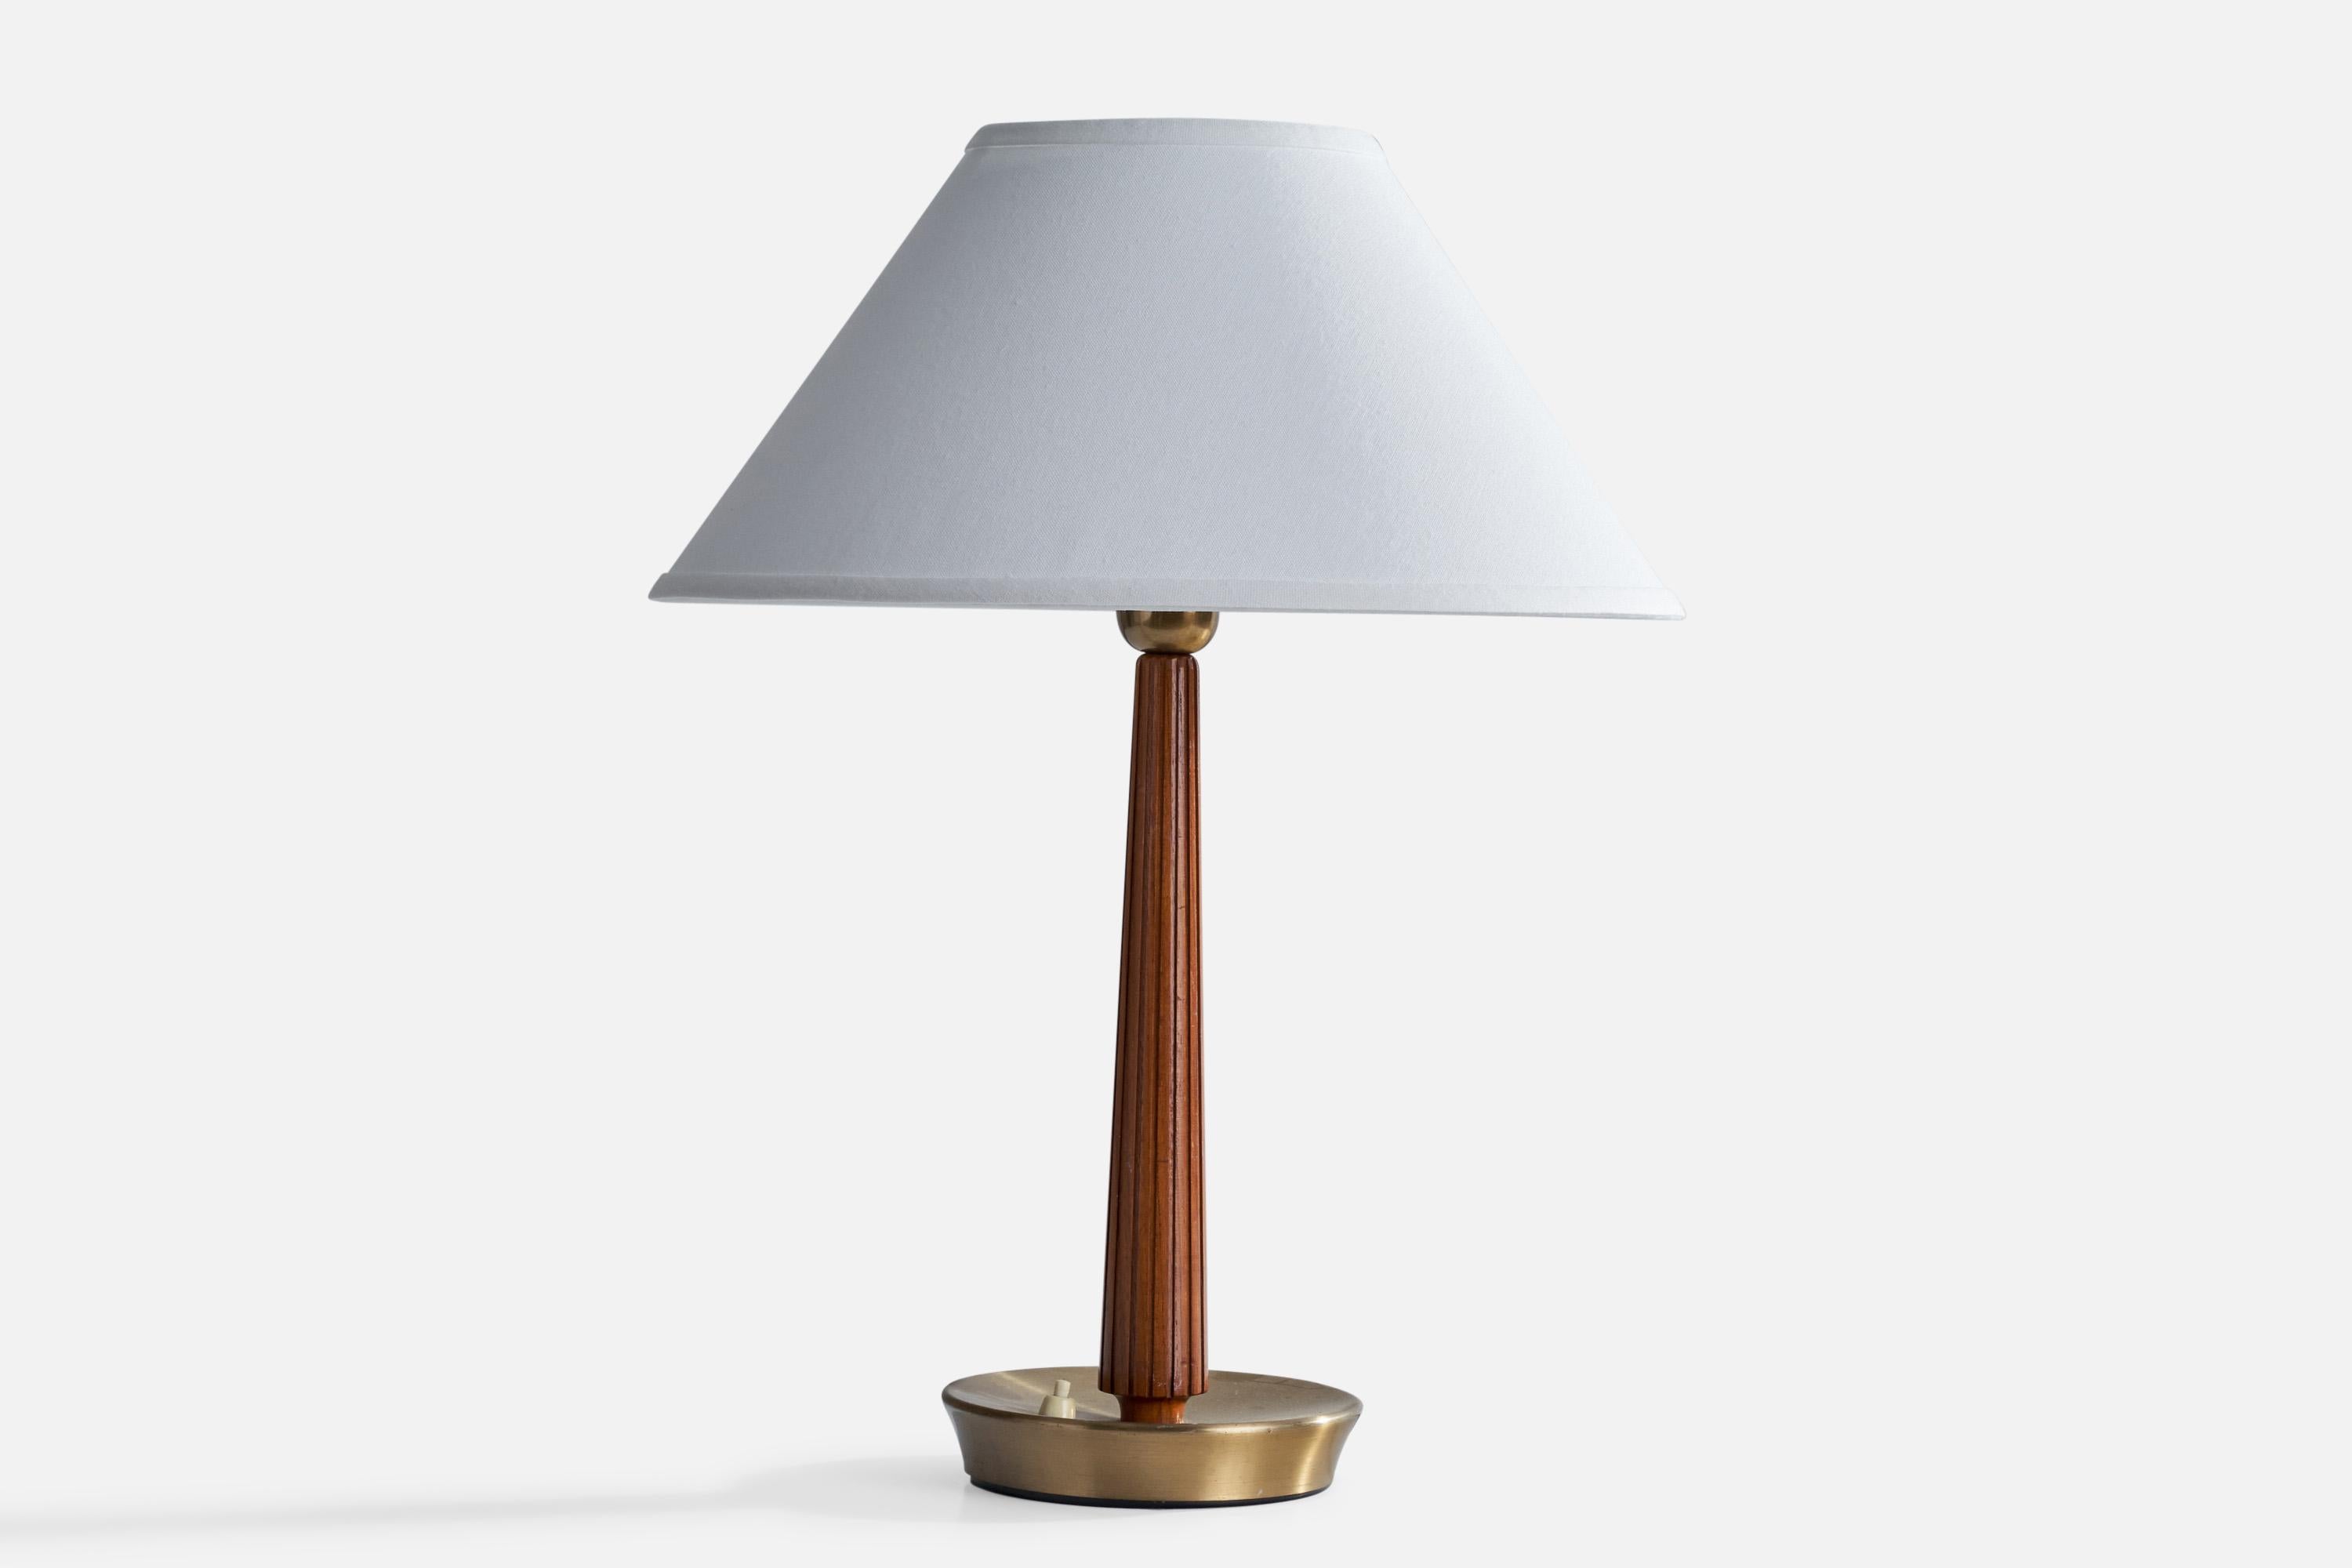 A brass and elm table lamp designed by Hans Bergström and produced by ASEA, Sweden, c. 1940s.

Dimensions of Lamp (inches): 16” H x 6.75”  Diameter
Dimensions of Shade (inches): 6” Top Diameter x 16” Bottom Diameter x 9.25” H
Dimensions of Lamp with